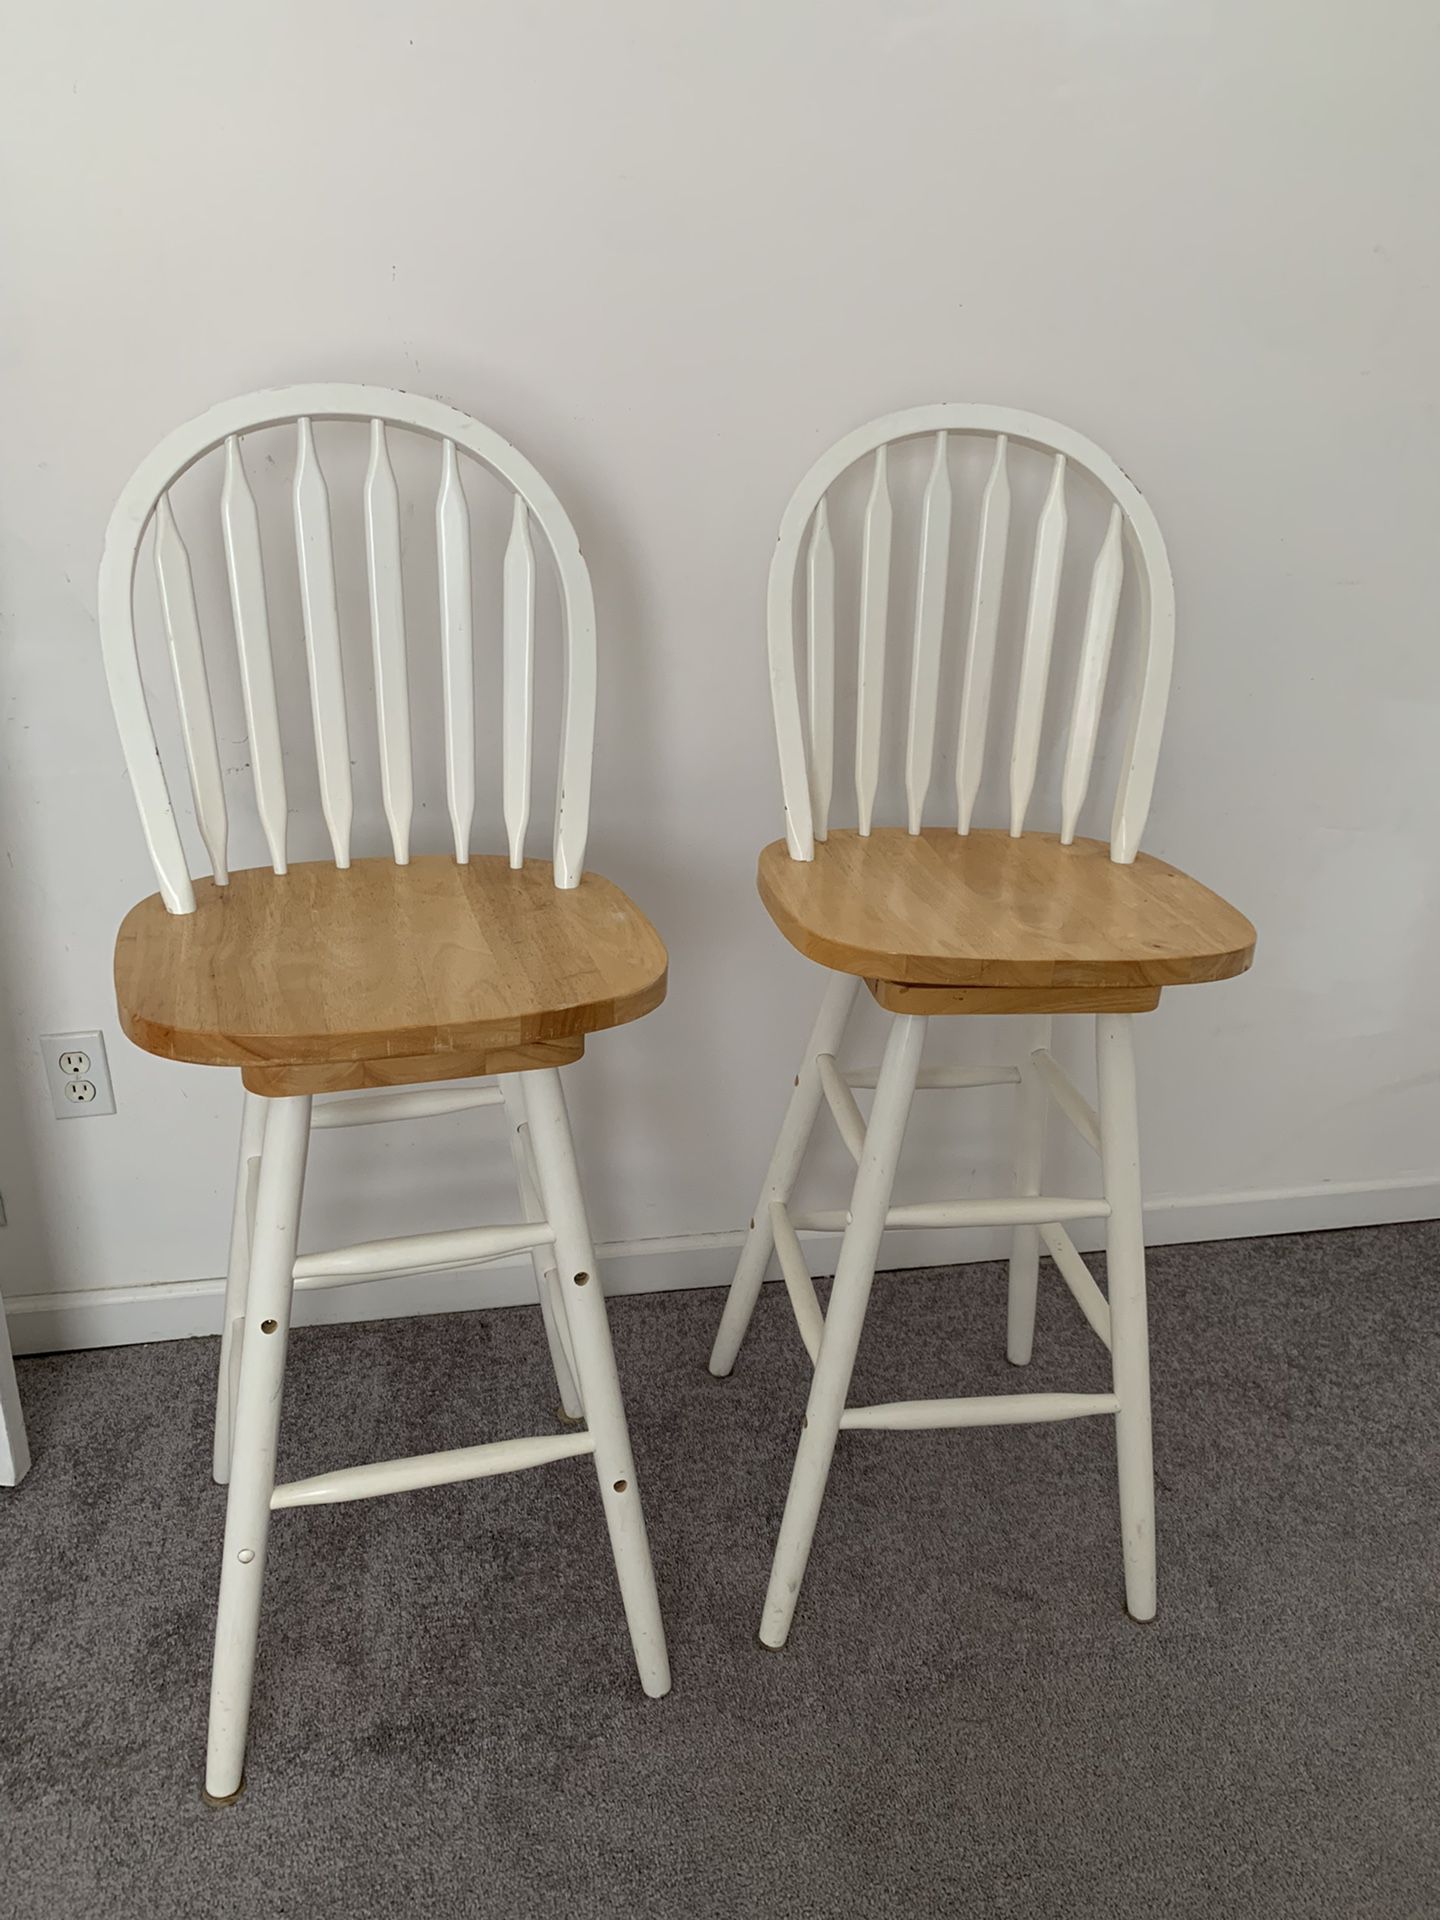 2 Wooden Stools With Swivel Seats